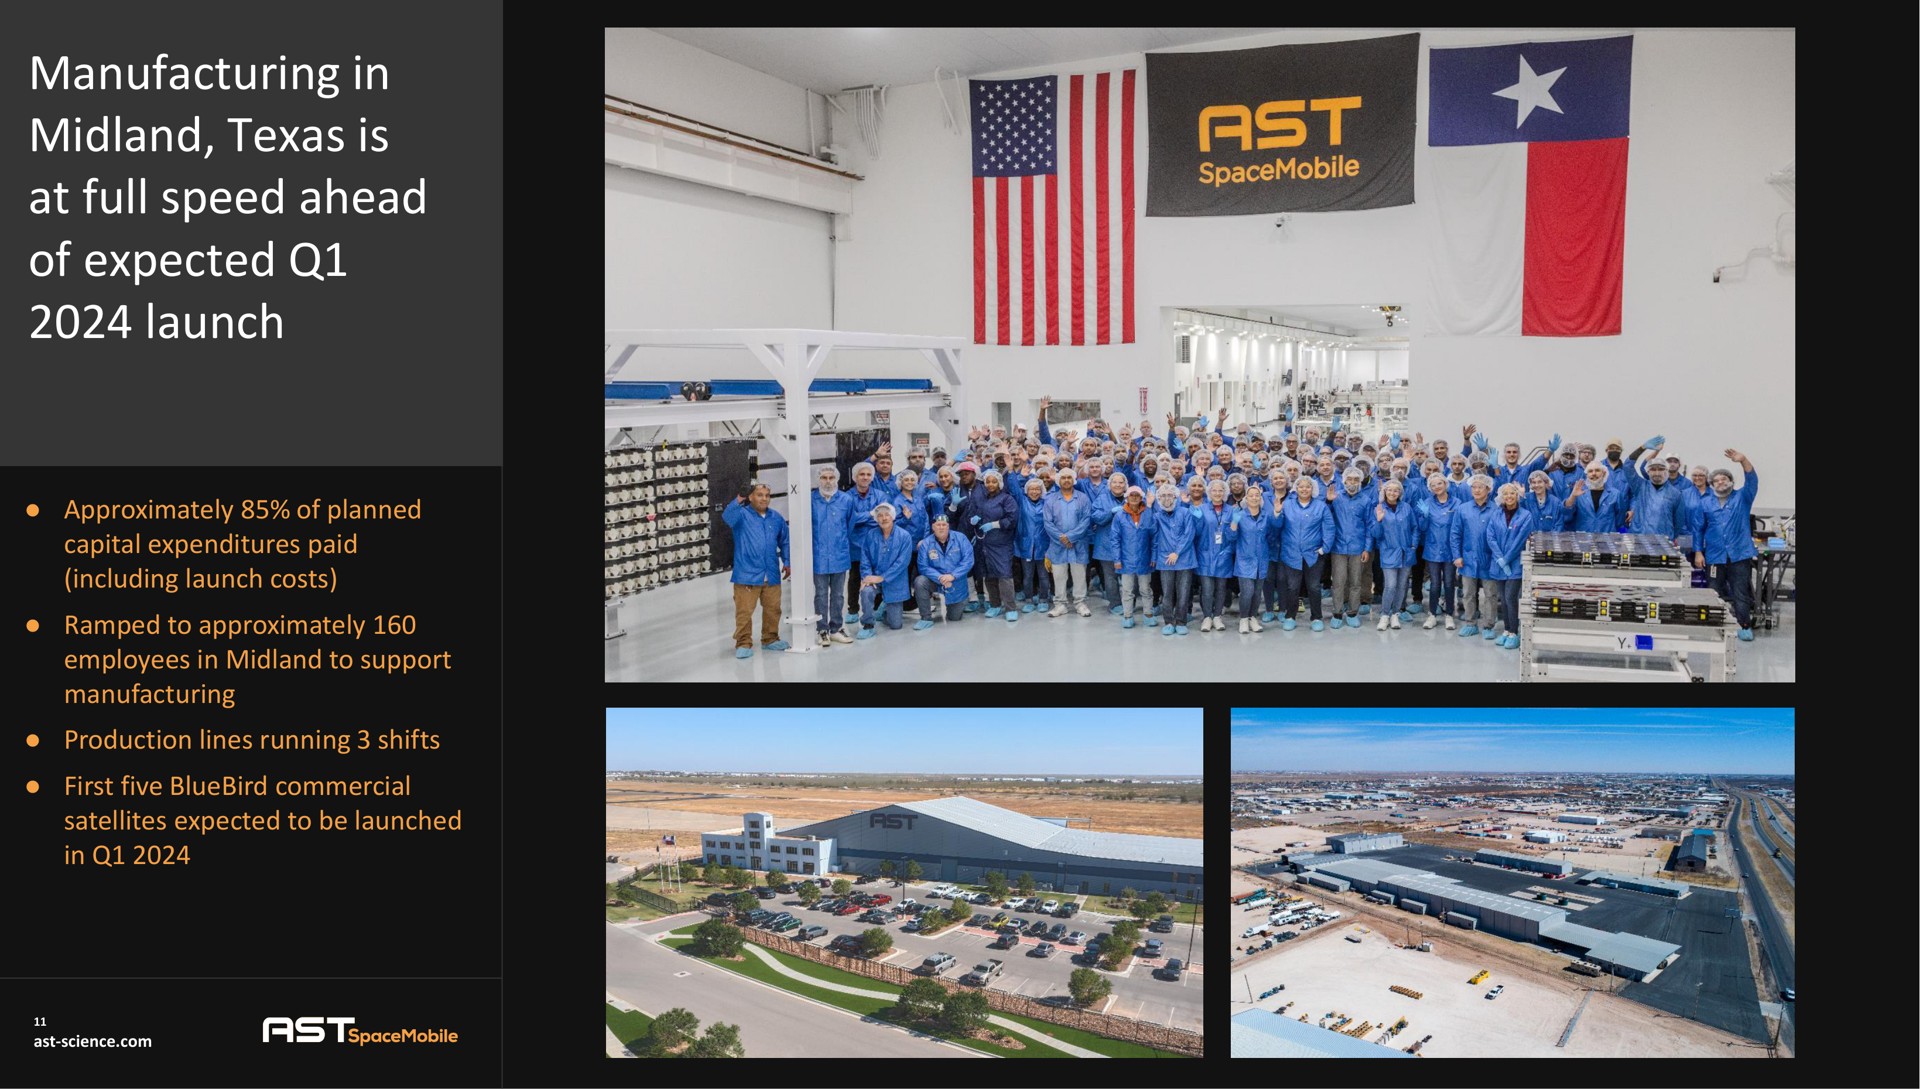 manufacturing in midland is at full speed ahead of expected launch | AST SpaceMobile